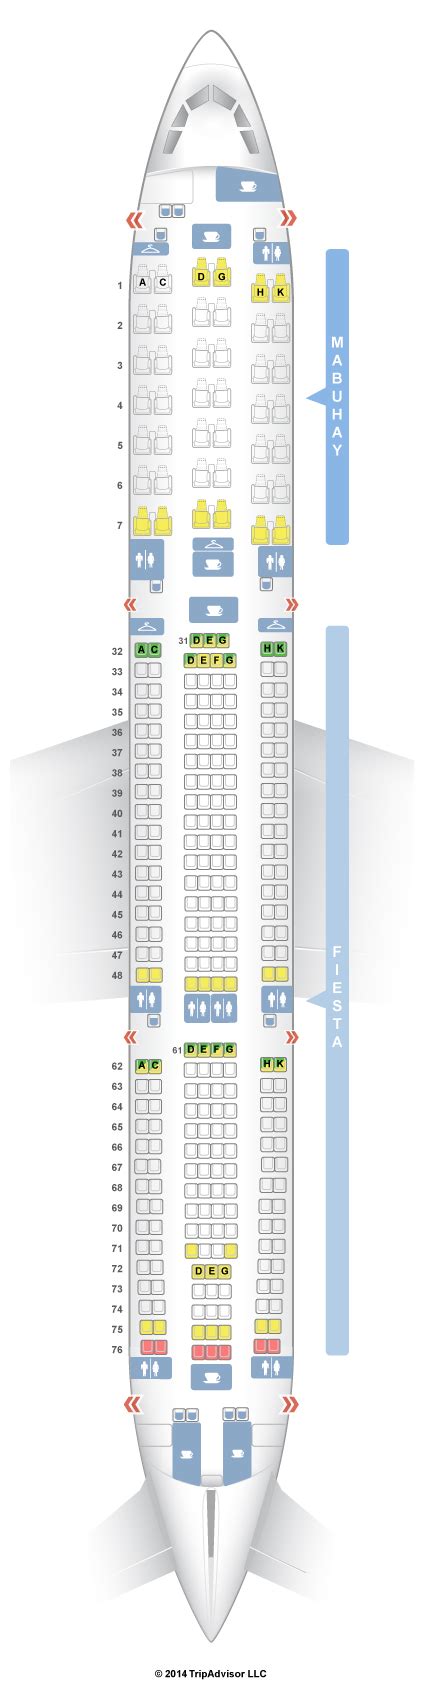 Airbus A Seating Plan Philippine Airlines Elcho Table